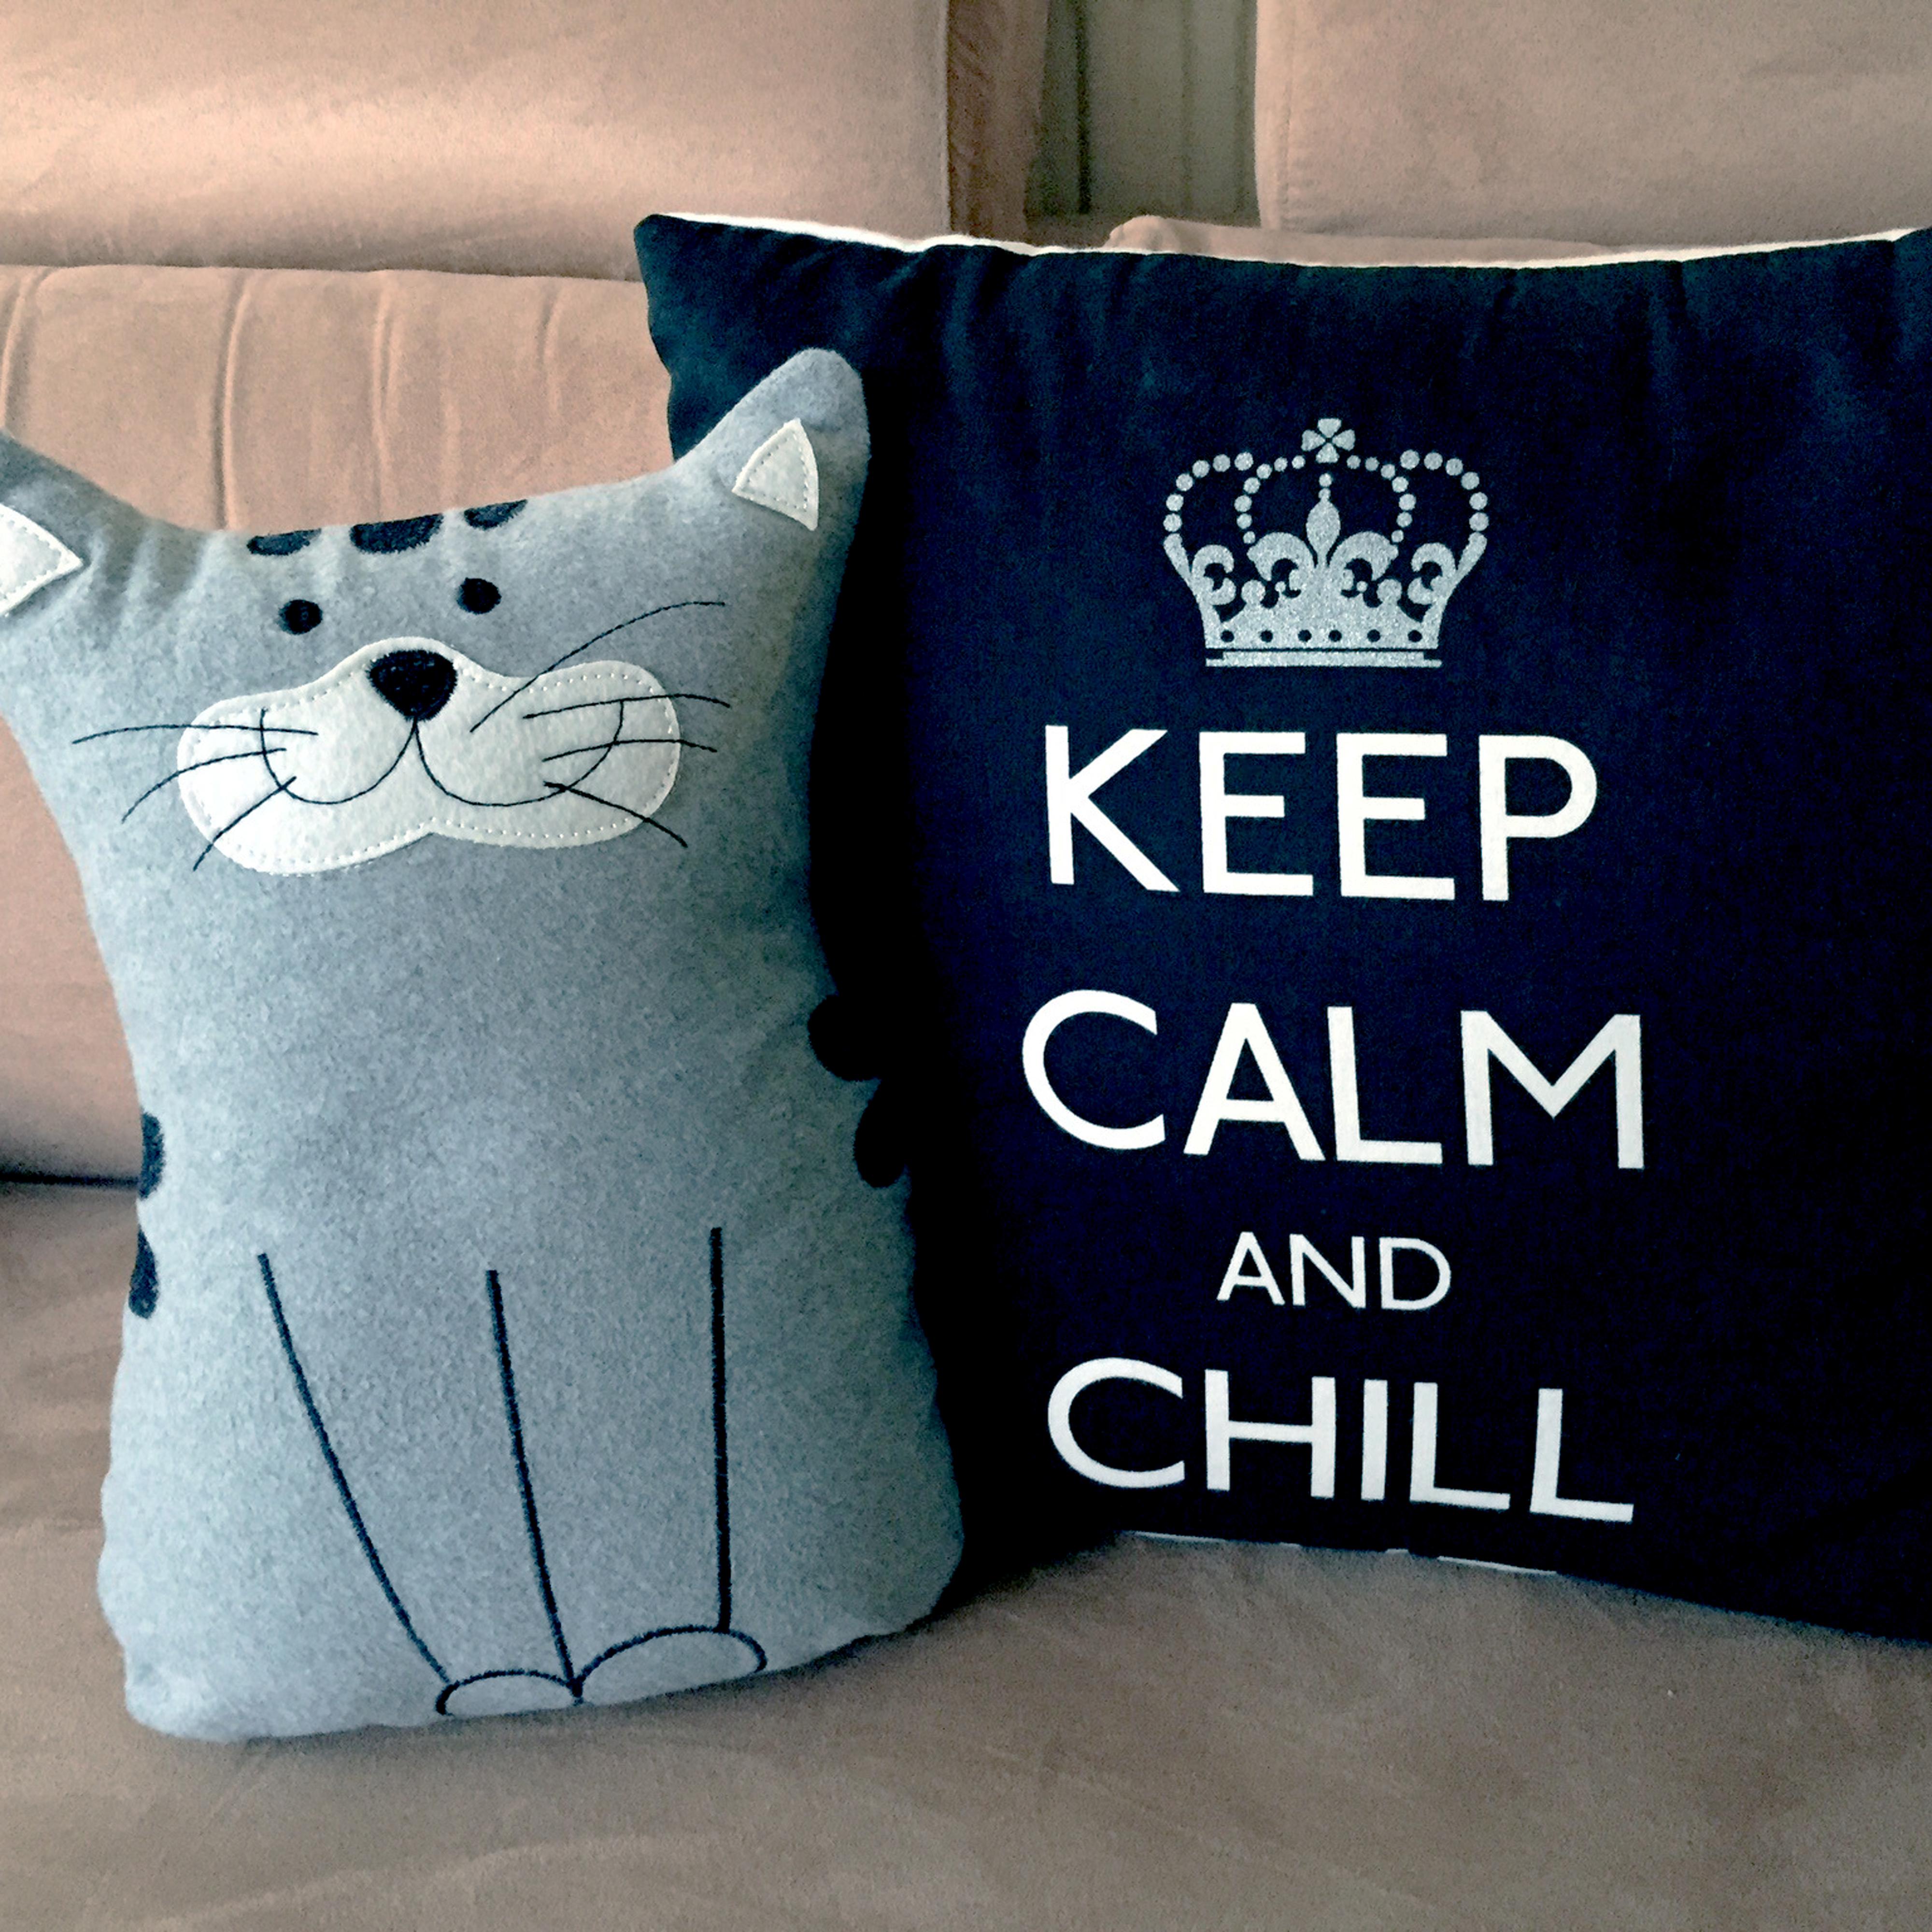 Keep Calm and Chill, Relaxing Chillout Piano, Reading and Studying Music, Concentration and Brain Power.